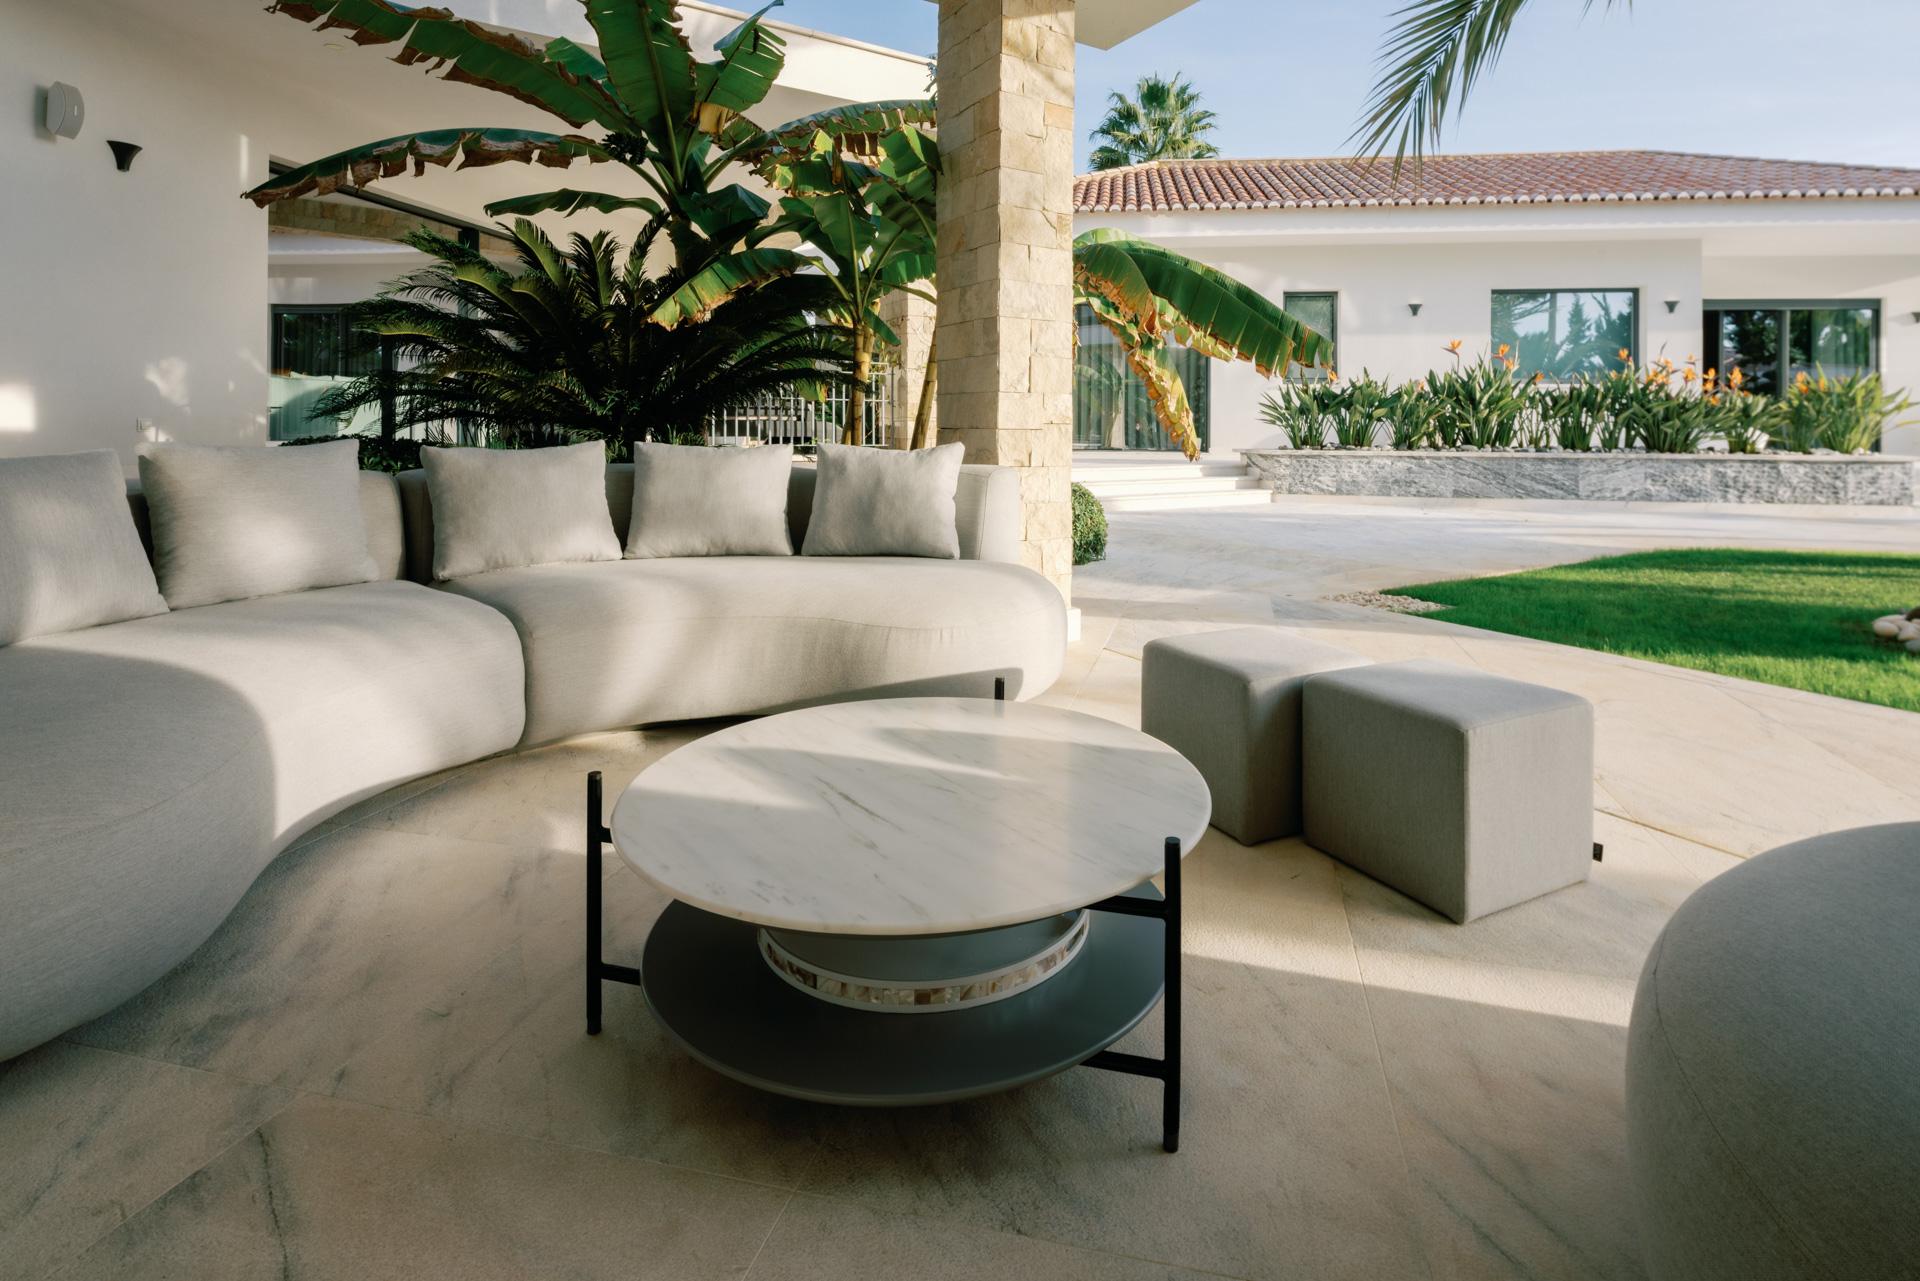 Twins Sofa Outdoors, Contemporary Collection, Handcrafted in Portugal - Europe by Greenapple.
 
Designed by Rute Martins for the Contemporary Collection, the Twins outdoors couch and day bed share the same genes, yet each possesses a distinct